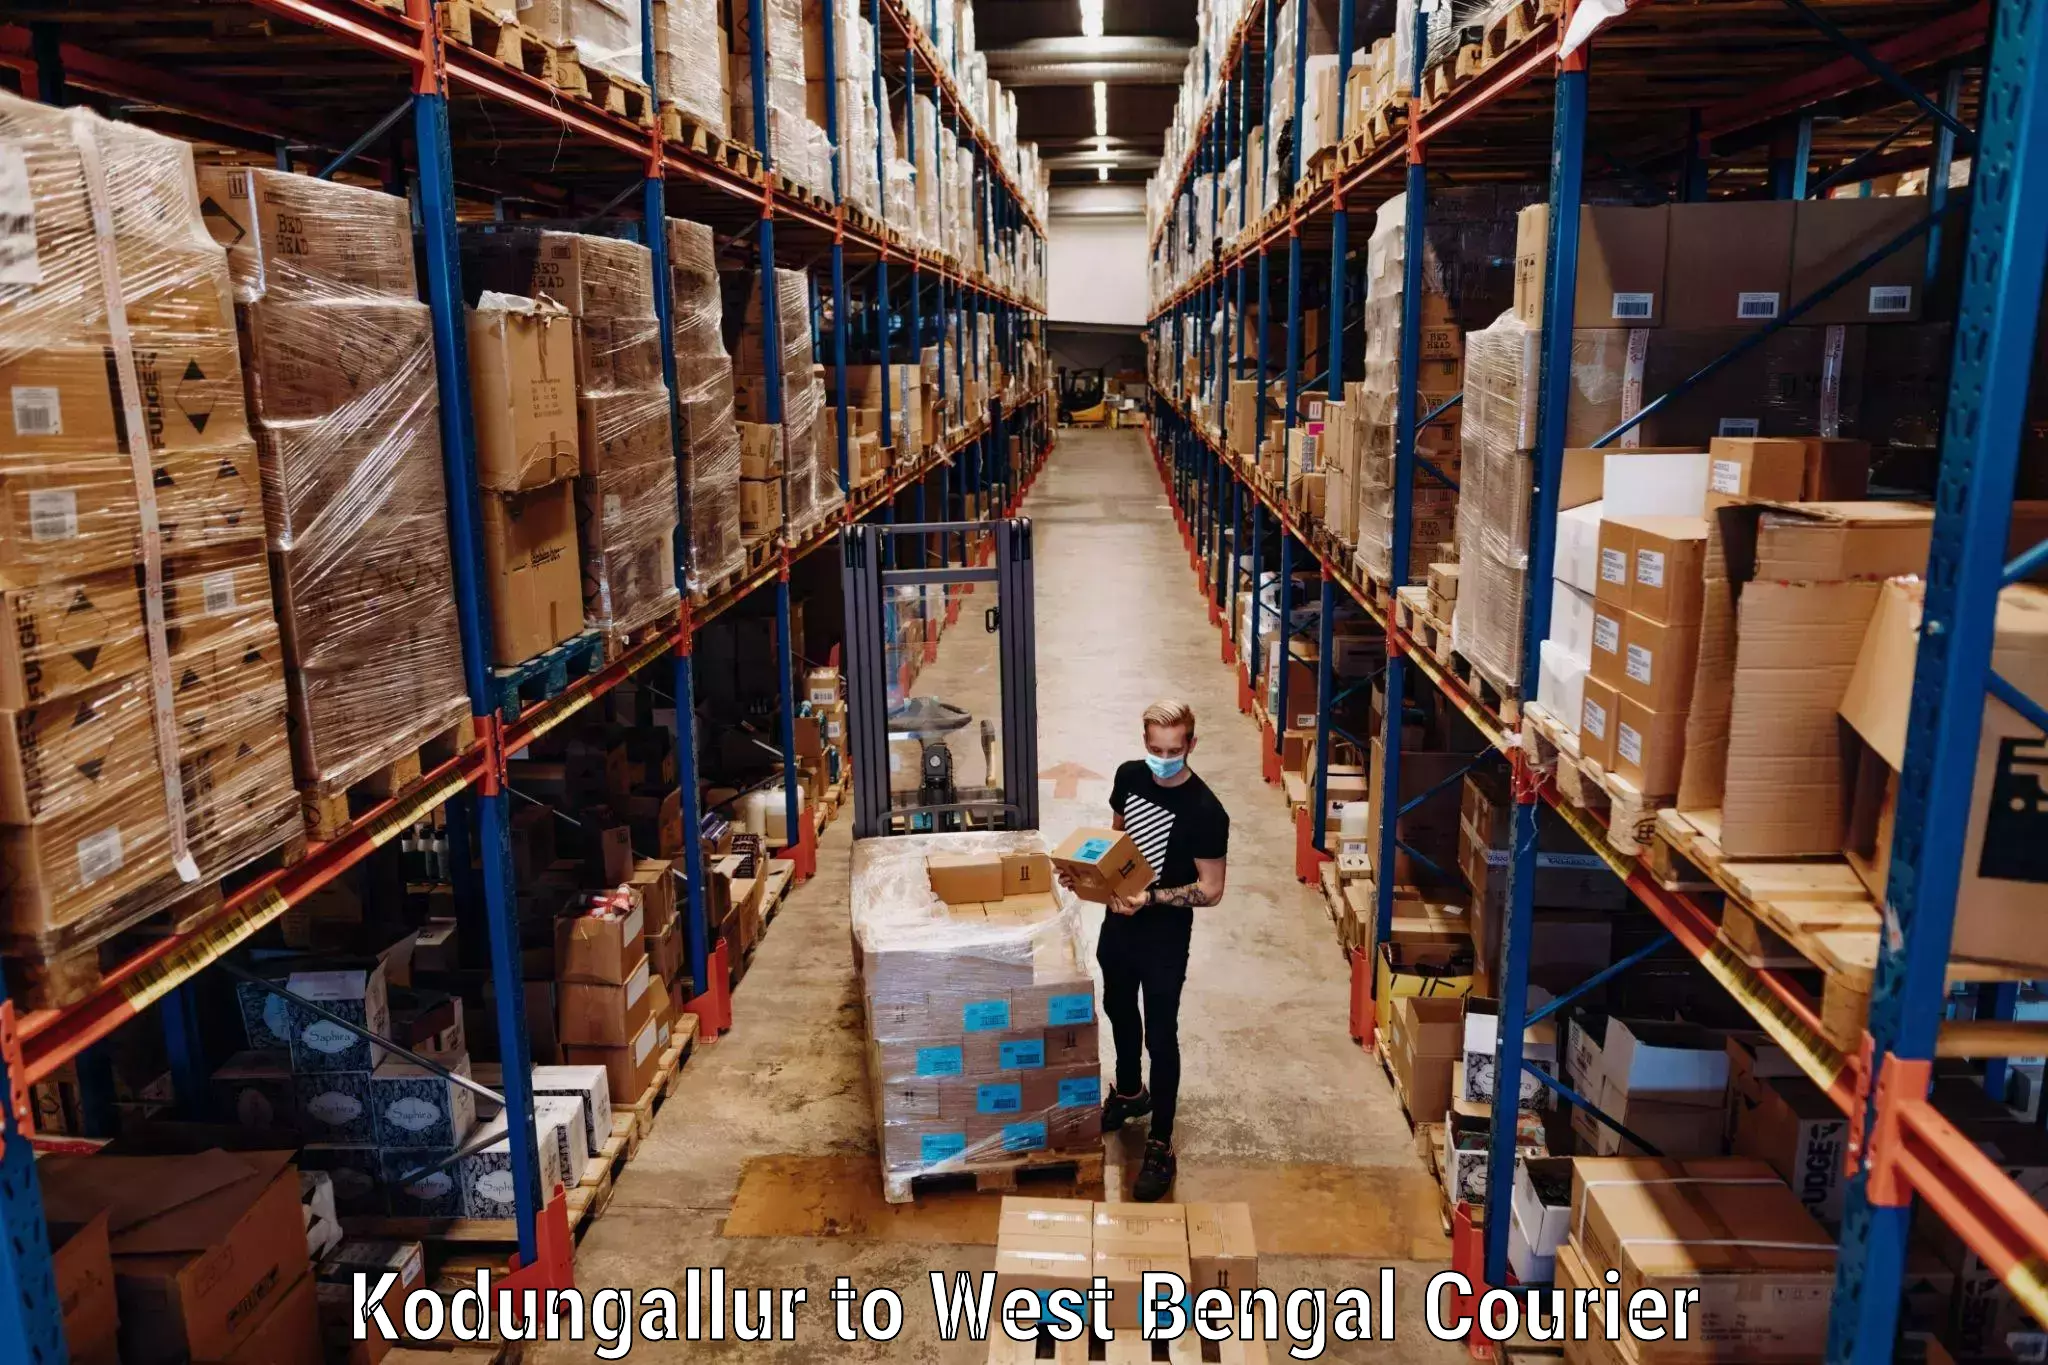 Luggage shipping specialists Kodungallur to West Bengal